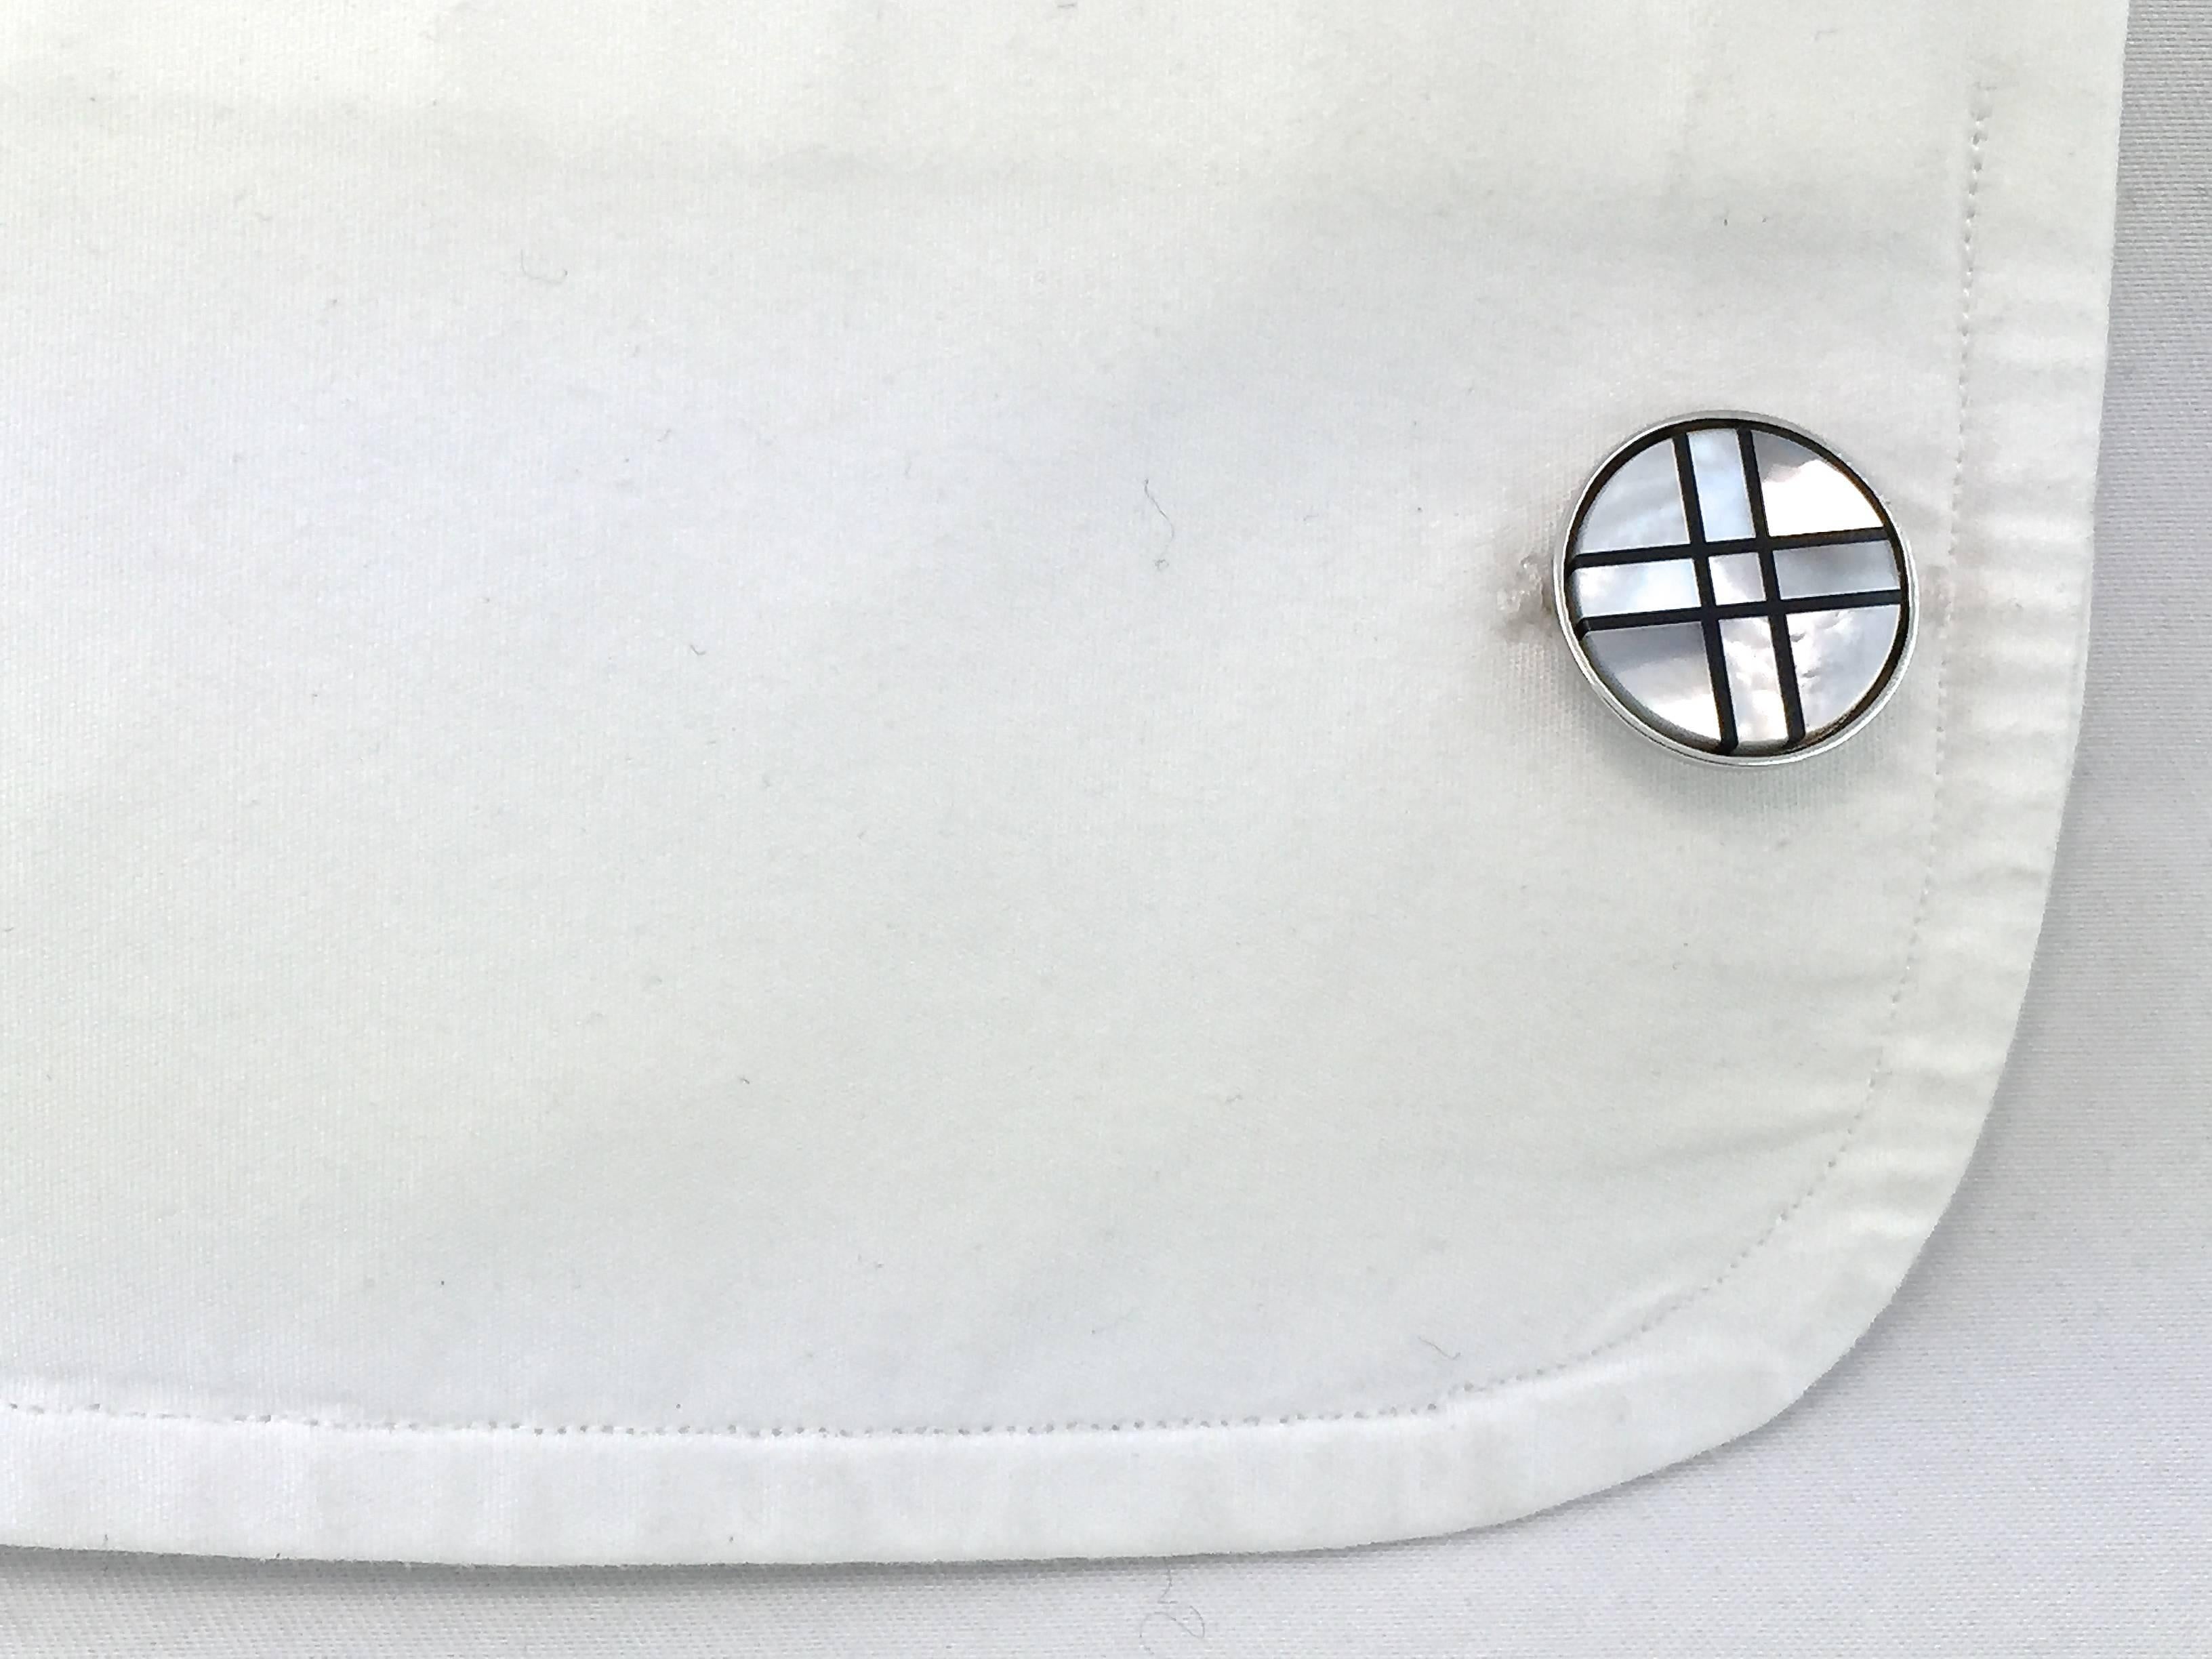 Jona design collection, hand crafted in Italy, sterling silver cufflinks with mother of pearl & onyx inlay.
Buttons diameter: 0.55 inch.
All Jona jewelry is new and has never been previously owned or worn. 